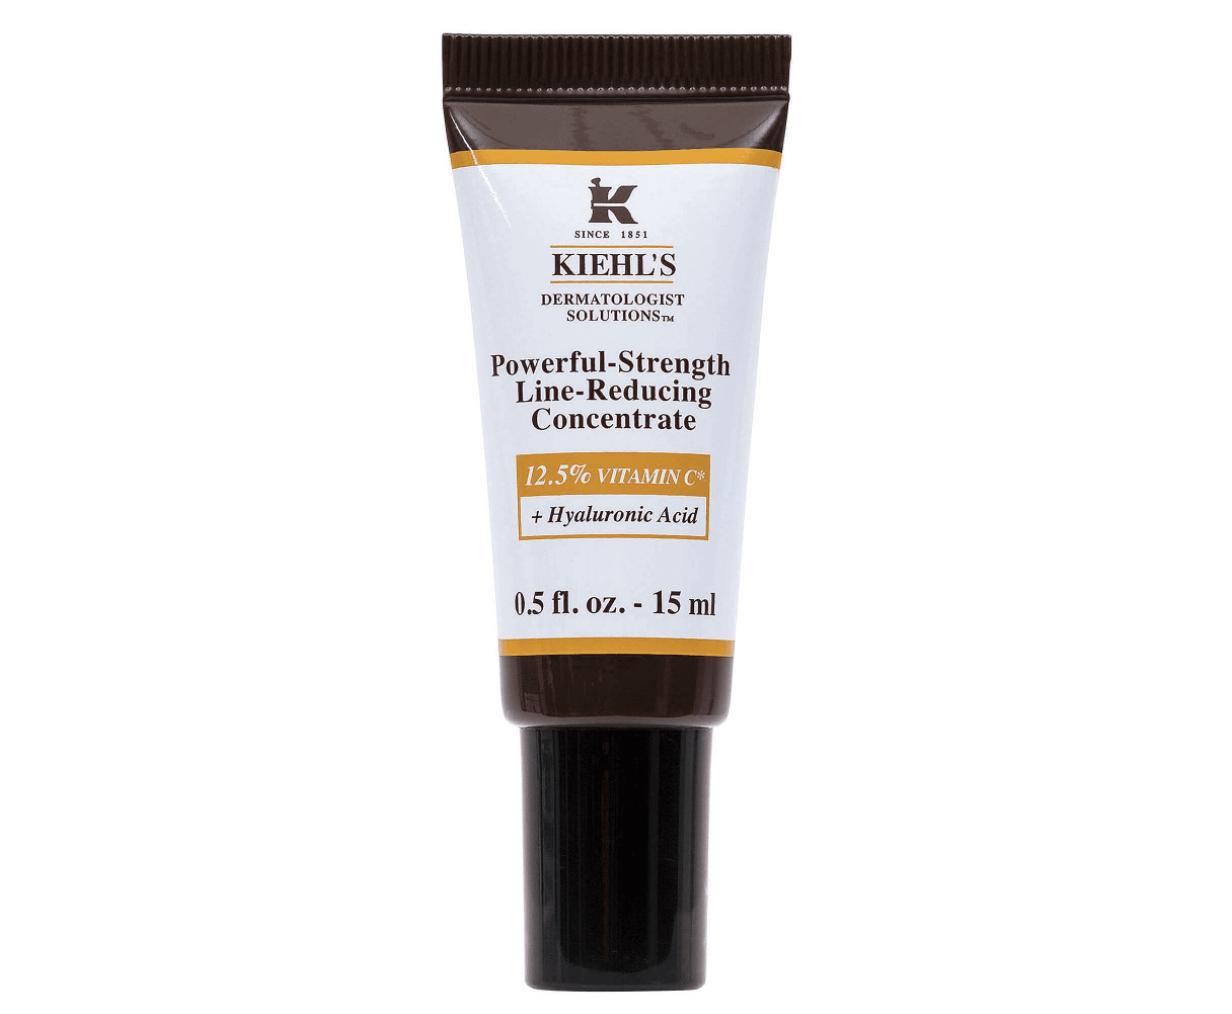 KIEHL'S Powerful-Strength Line-Reducing Concentrate Mini